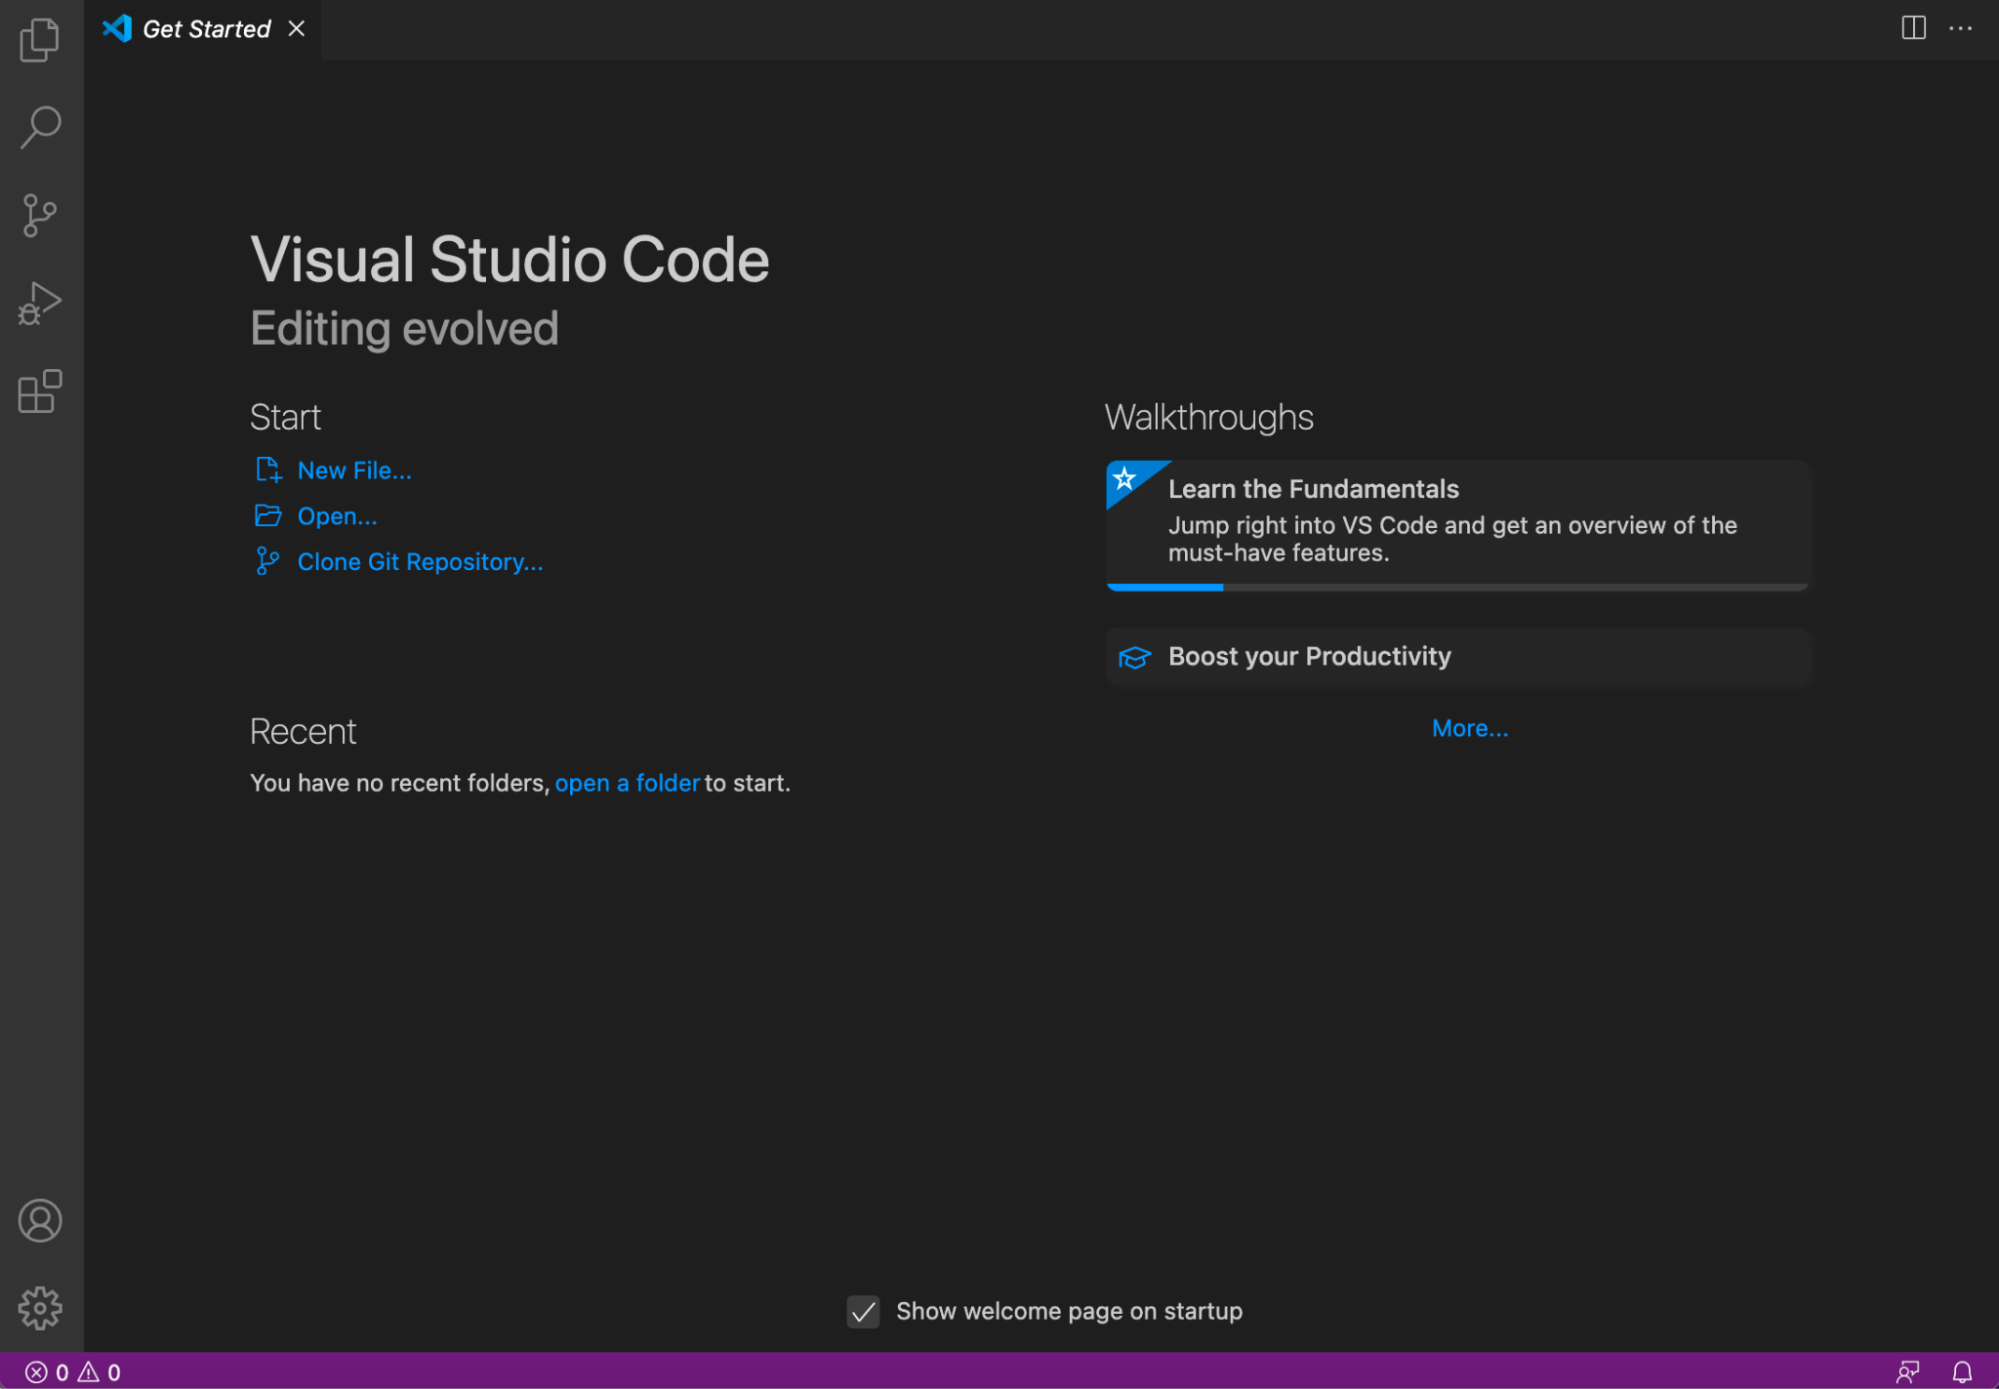 VS Code has been installed correctly